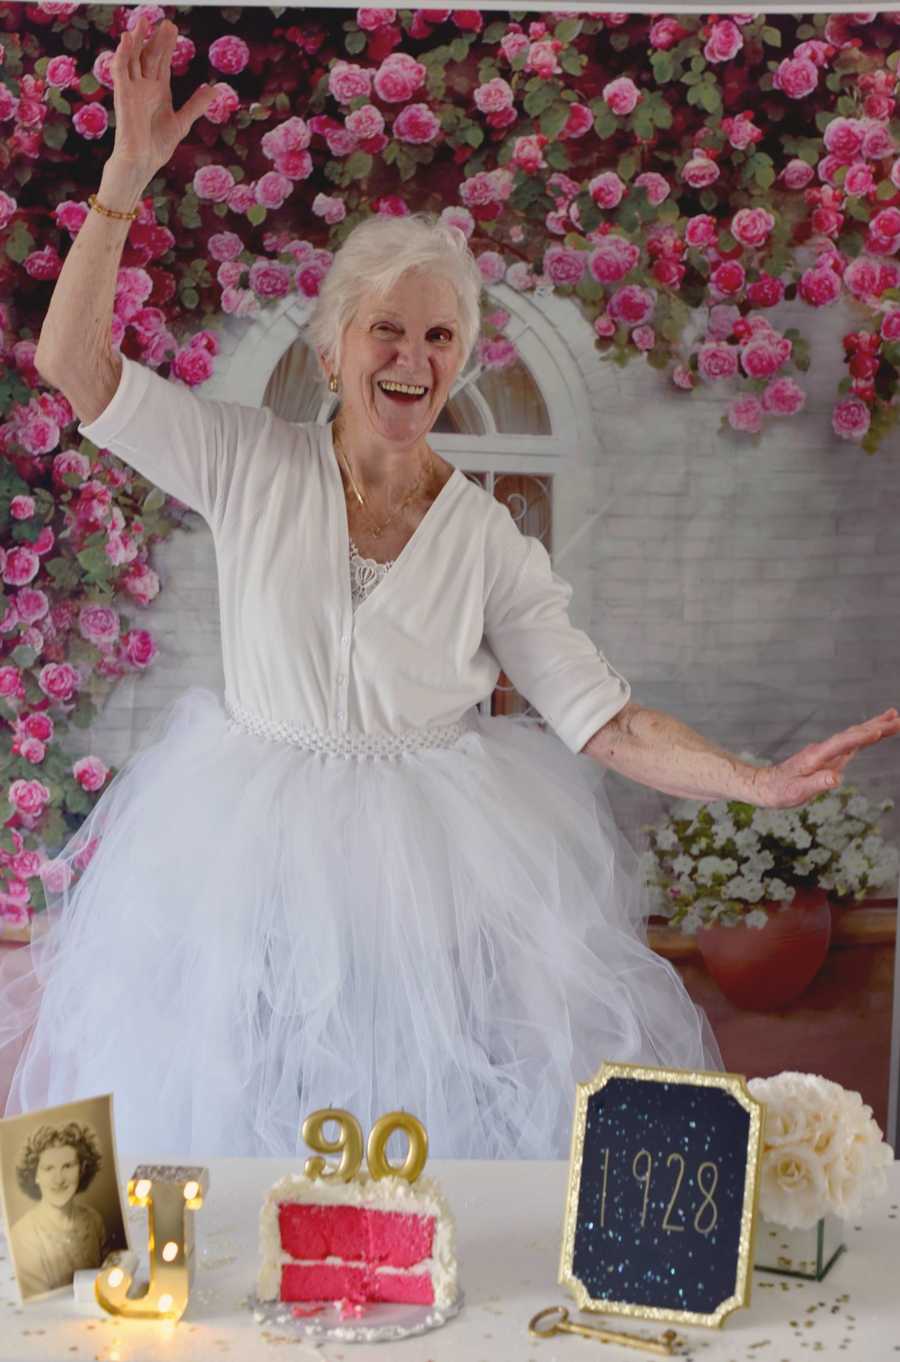 90 year old woman smiles while posing in front of birthday cake